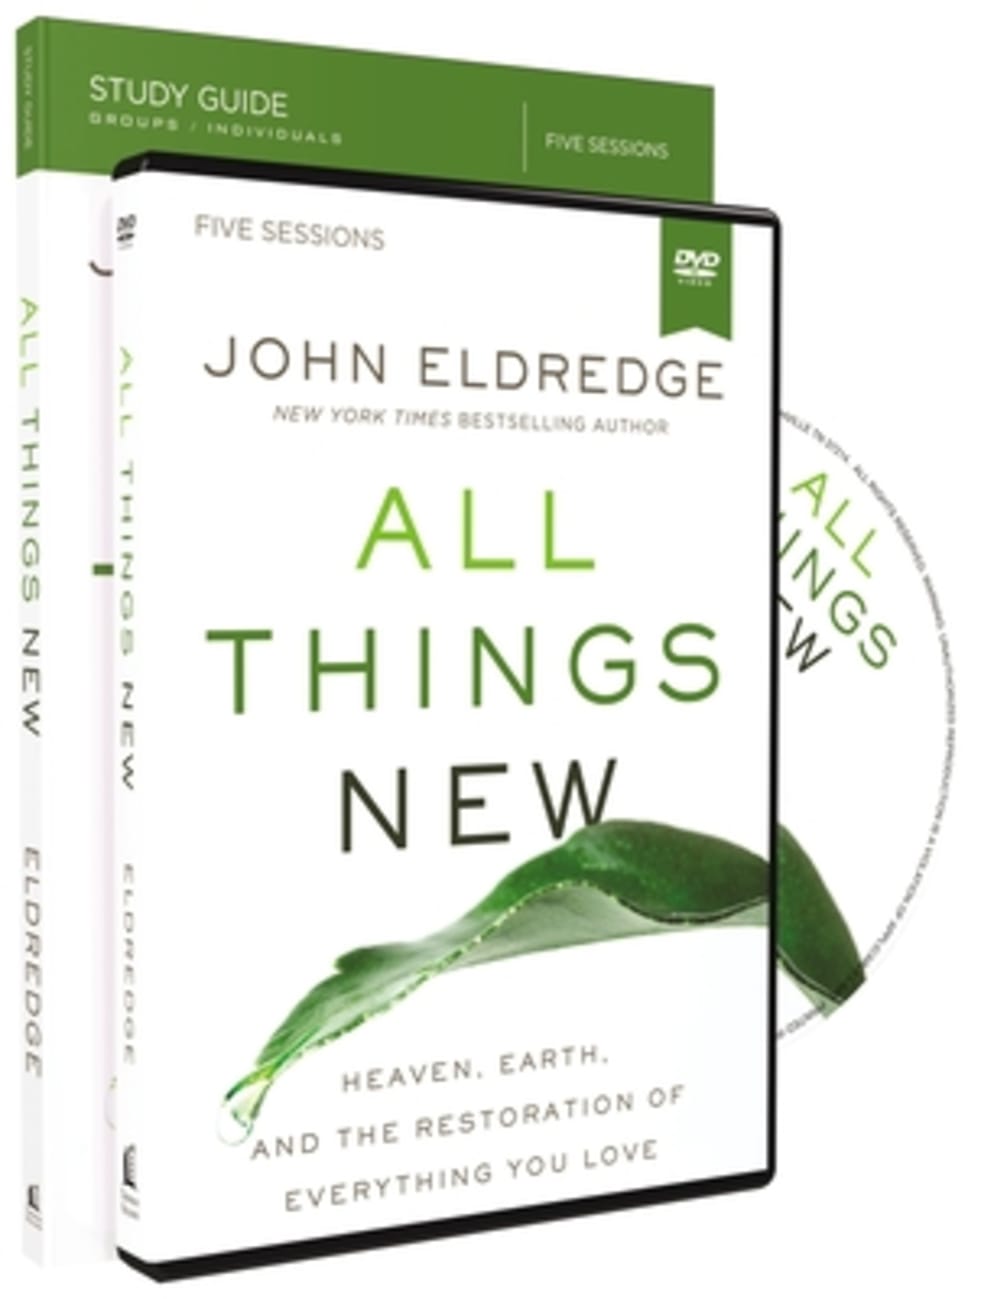 All Things New: A Revolutionary Look At Heaven and the Coming Kingdom (Study Guide With Dvd) Pack/Kit